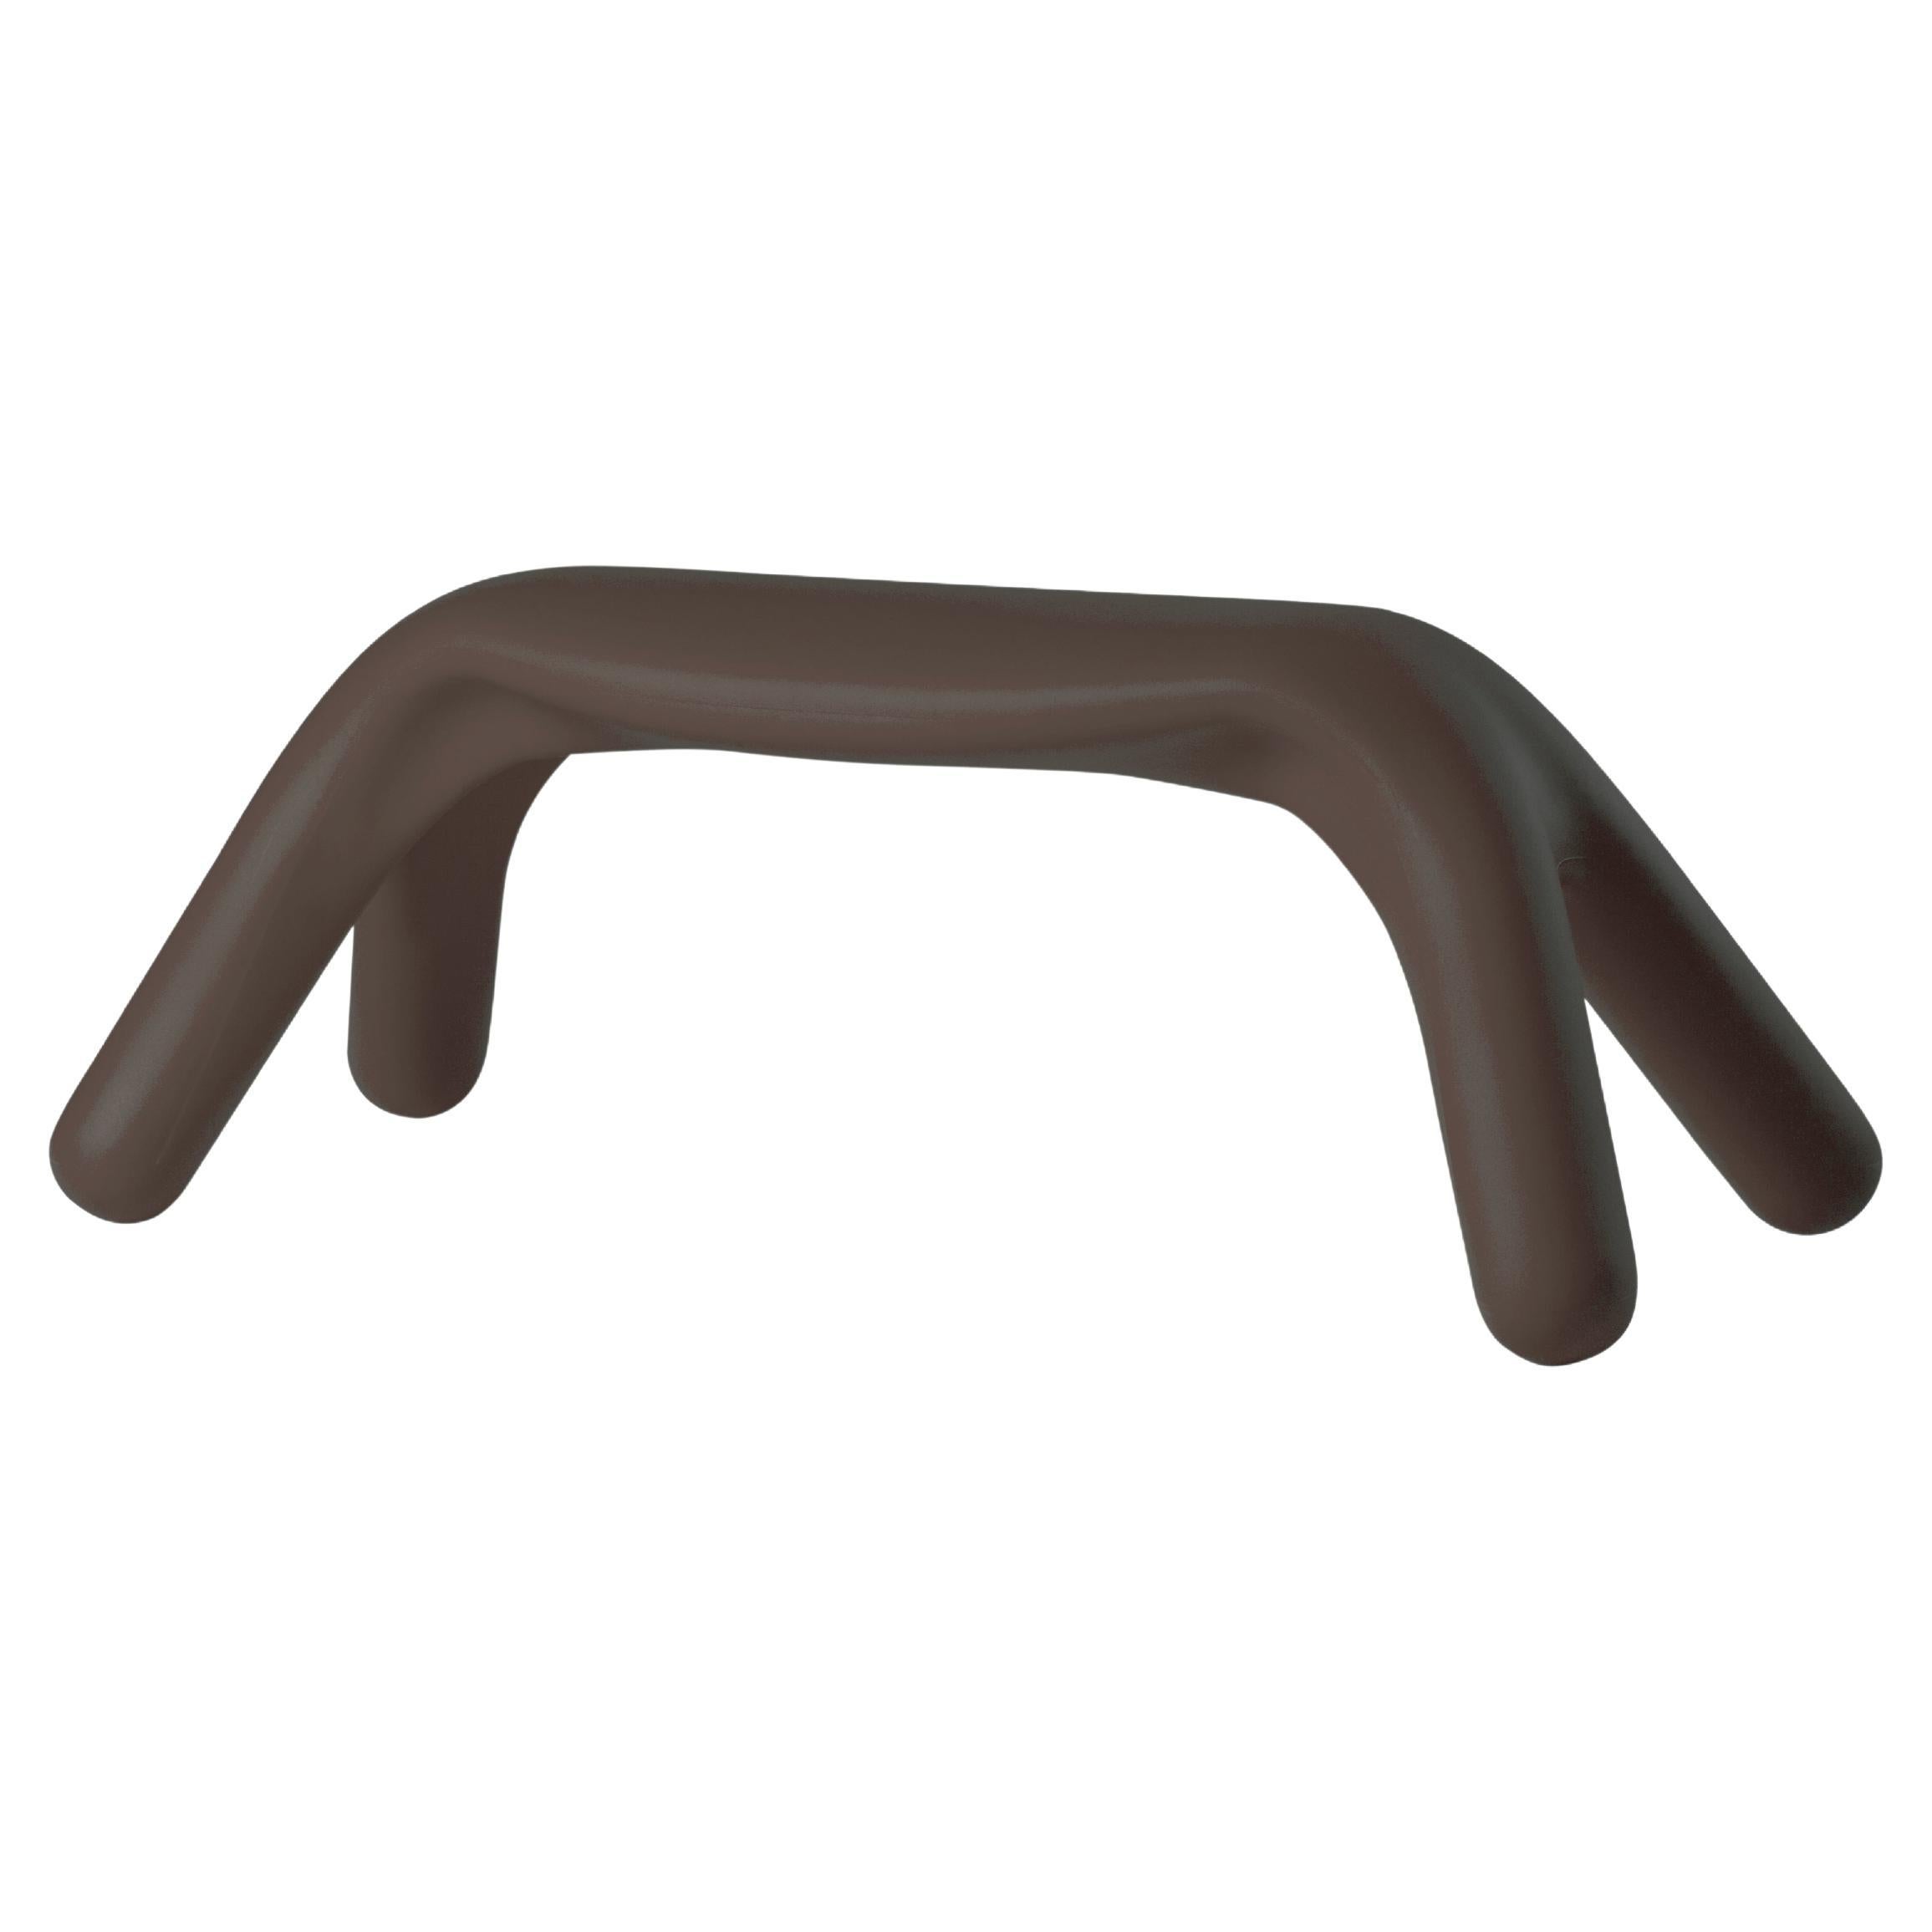 Chocolate Brown Atlas Bench by Giorgio Biscaro For Sale